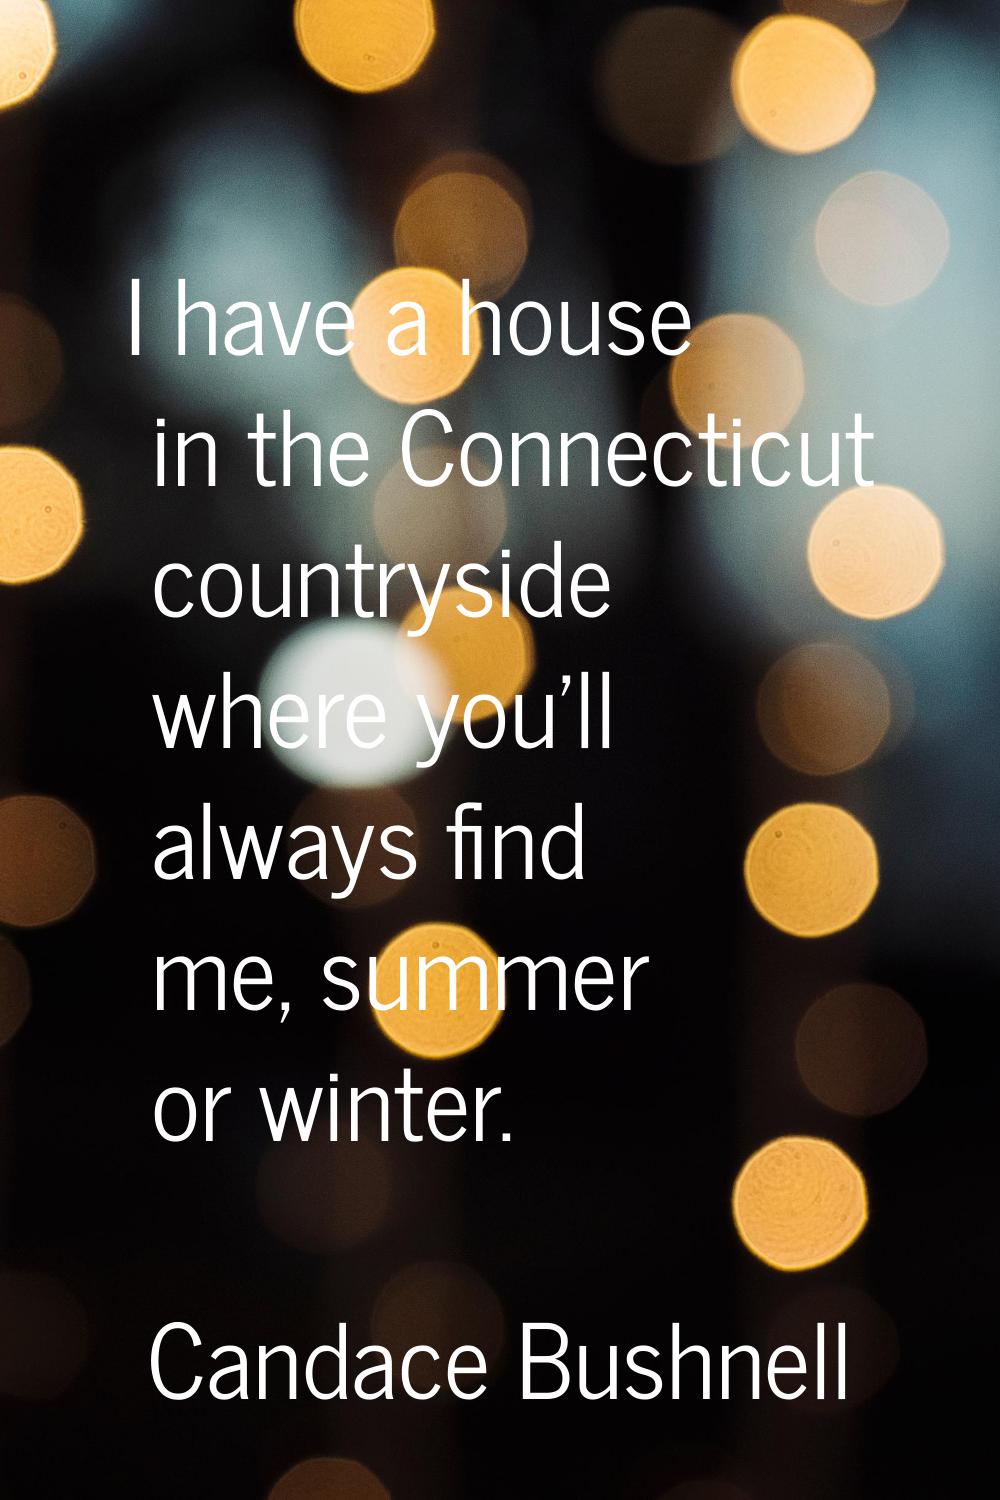 I have a house in the Connecticut countryside where you'll always find me, summer or winter.